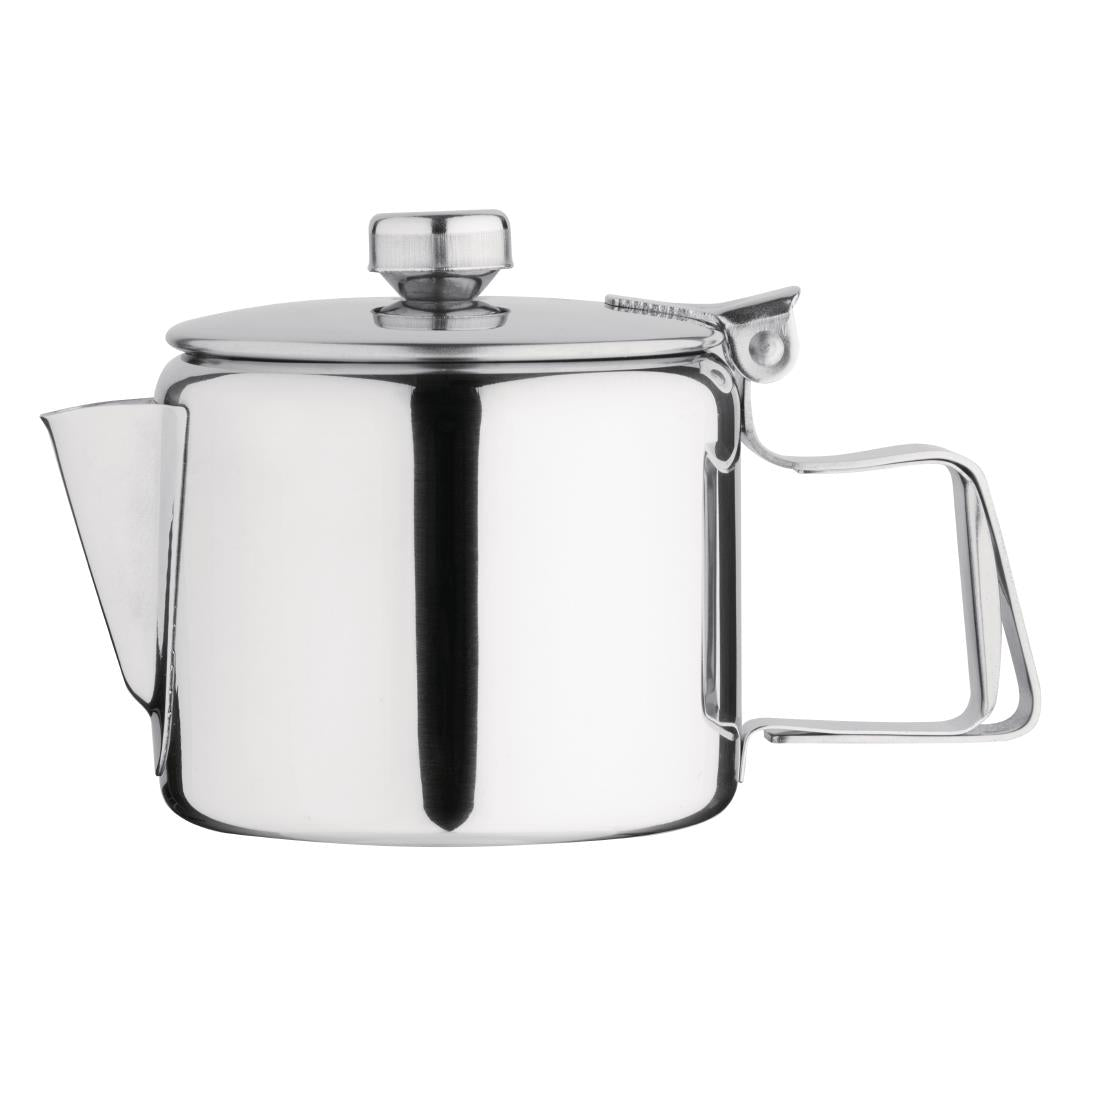 Olympia Concorde Stainless Steel Teapot 290ml